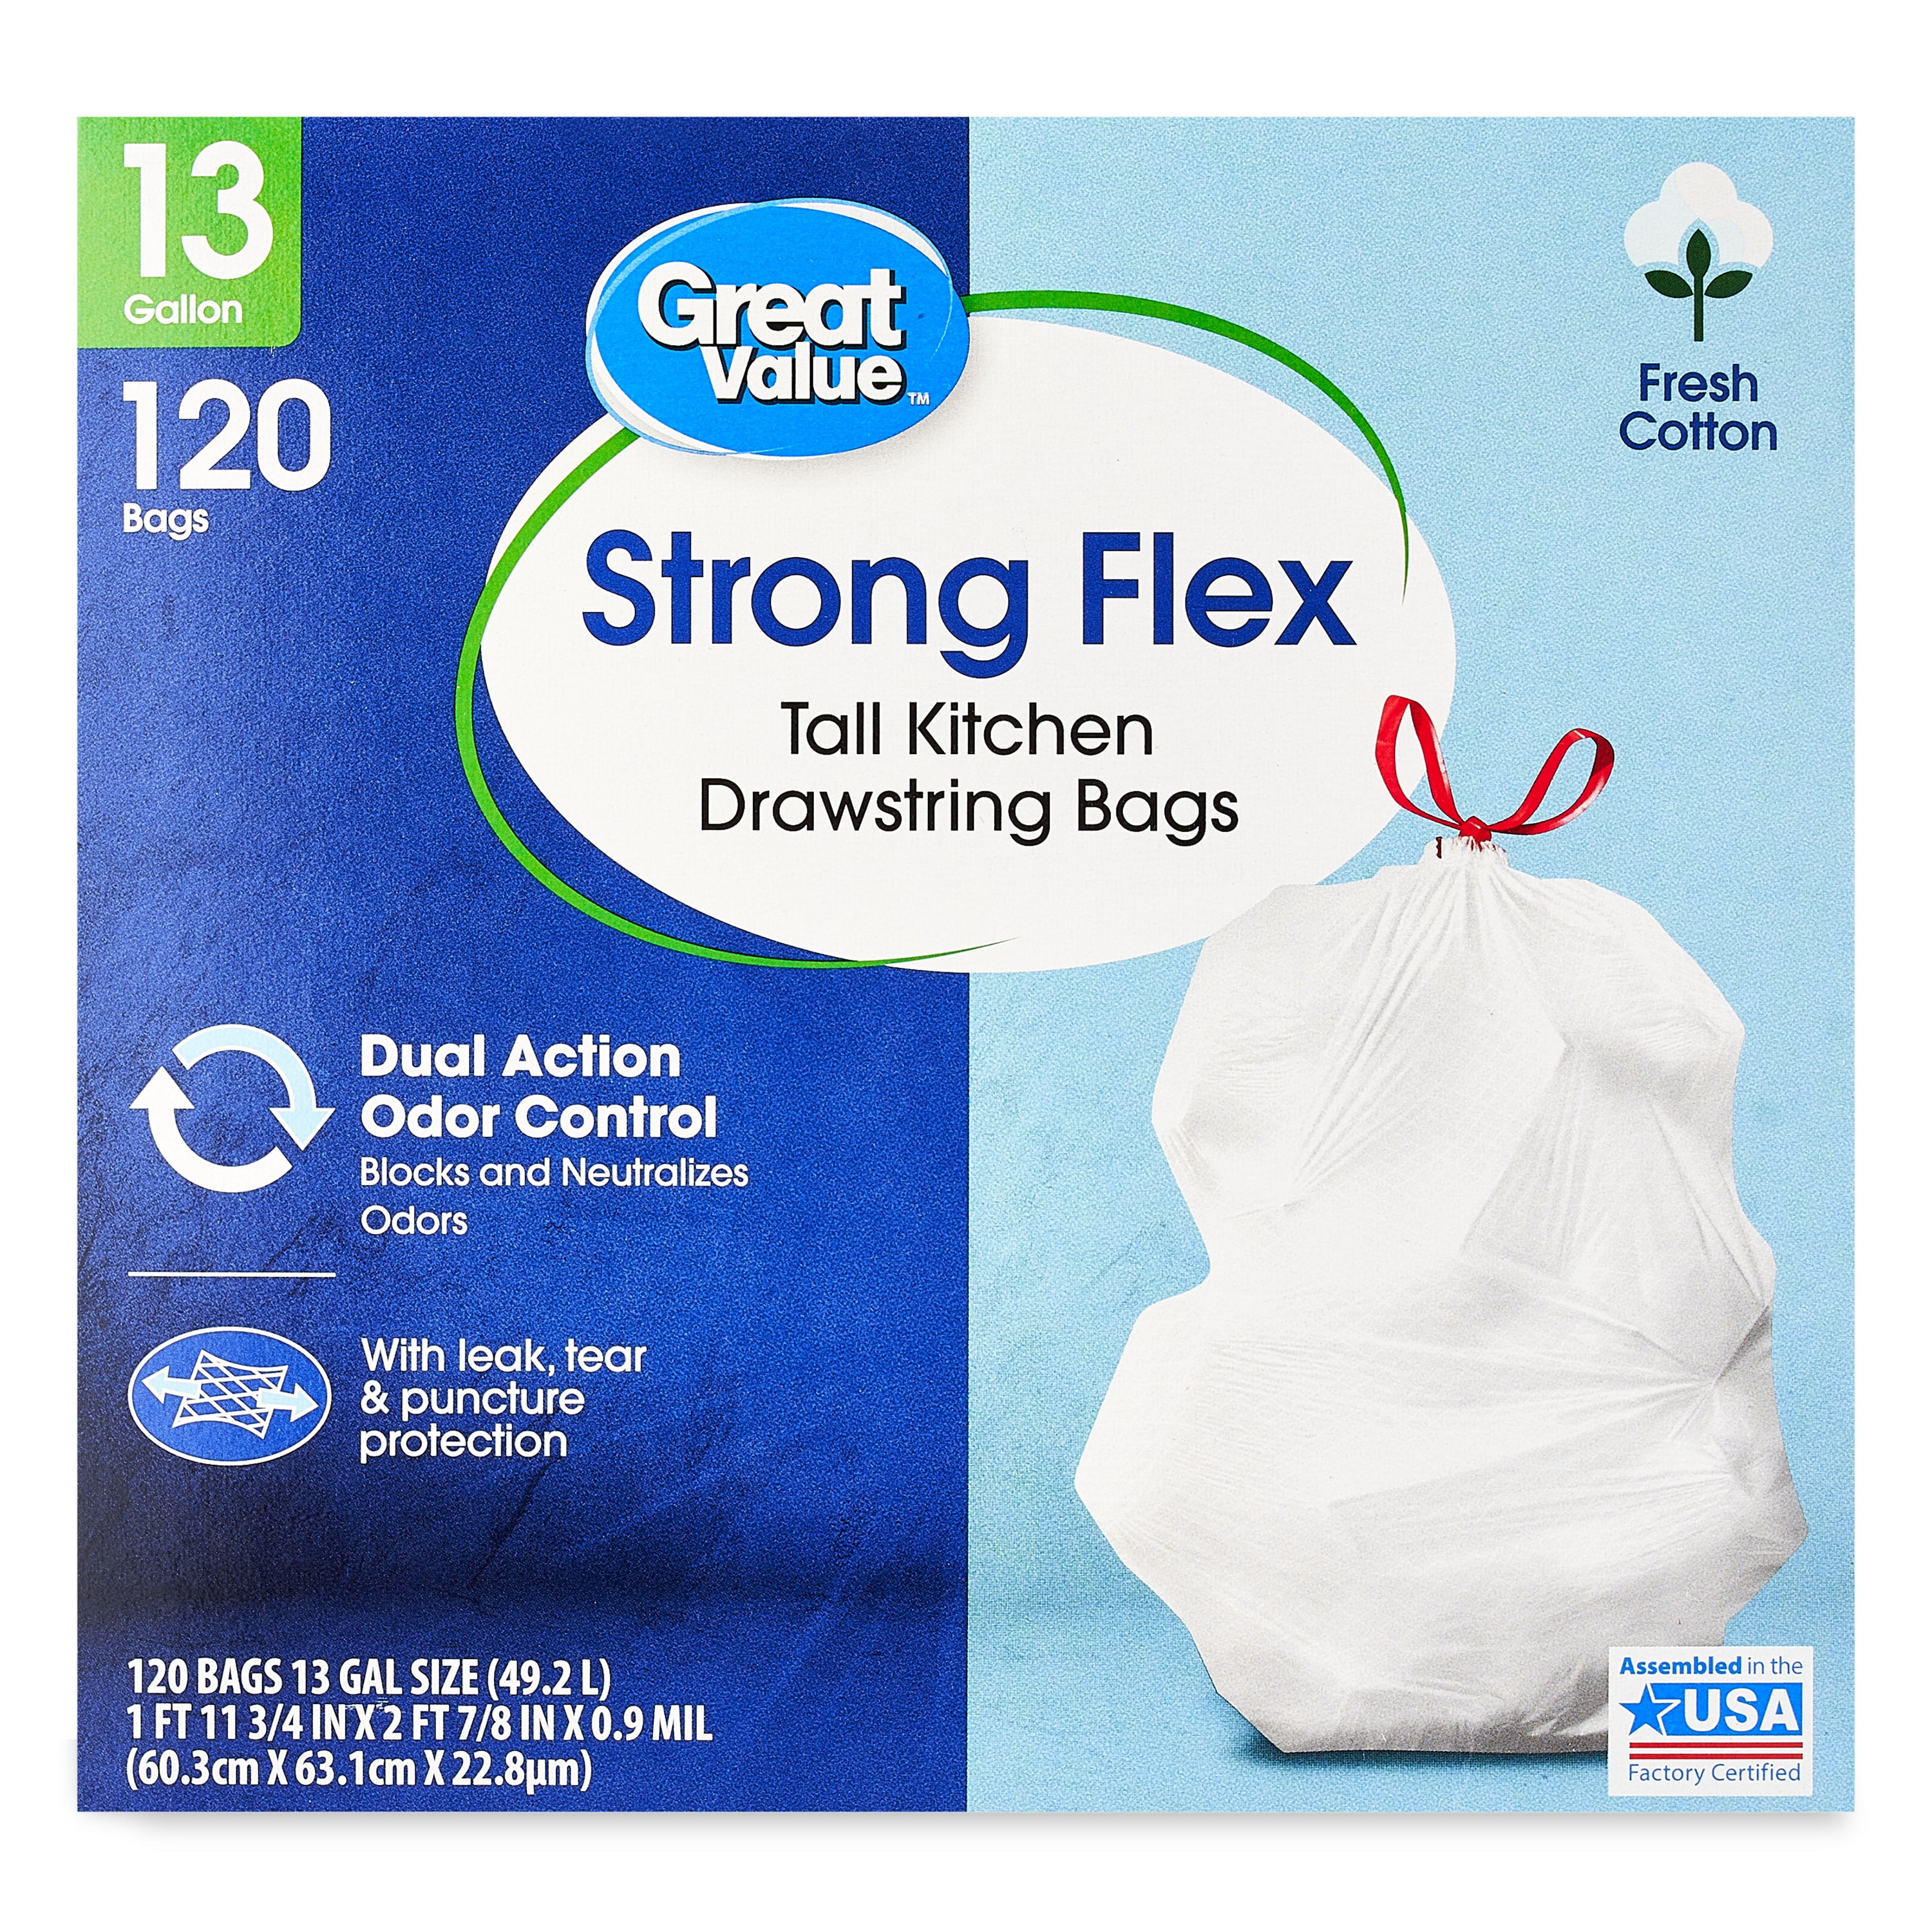 Great Value Strong Flex Tall Kitchen Drawstring Trash Bags, Fresh Cotton, 13 Gallon, 120 Count